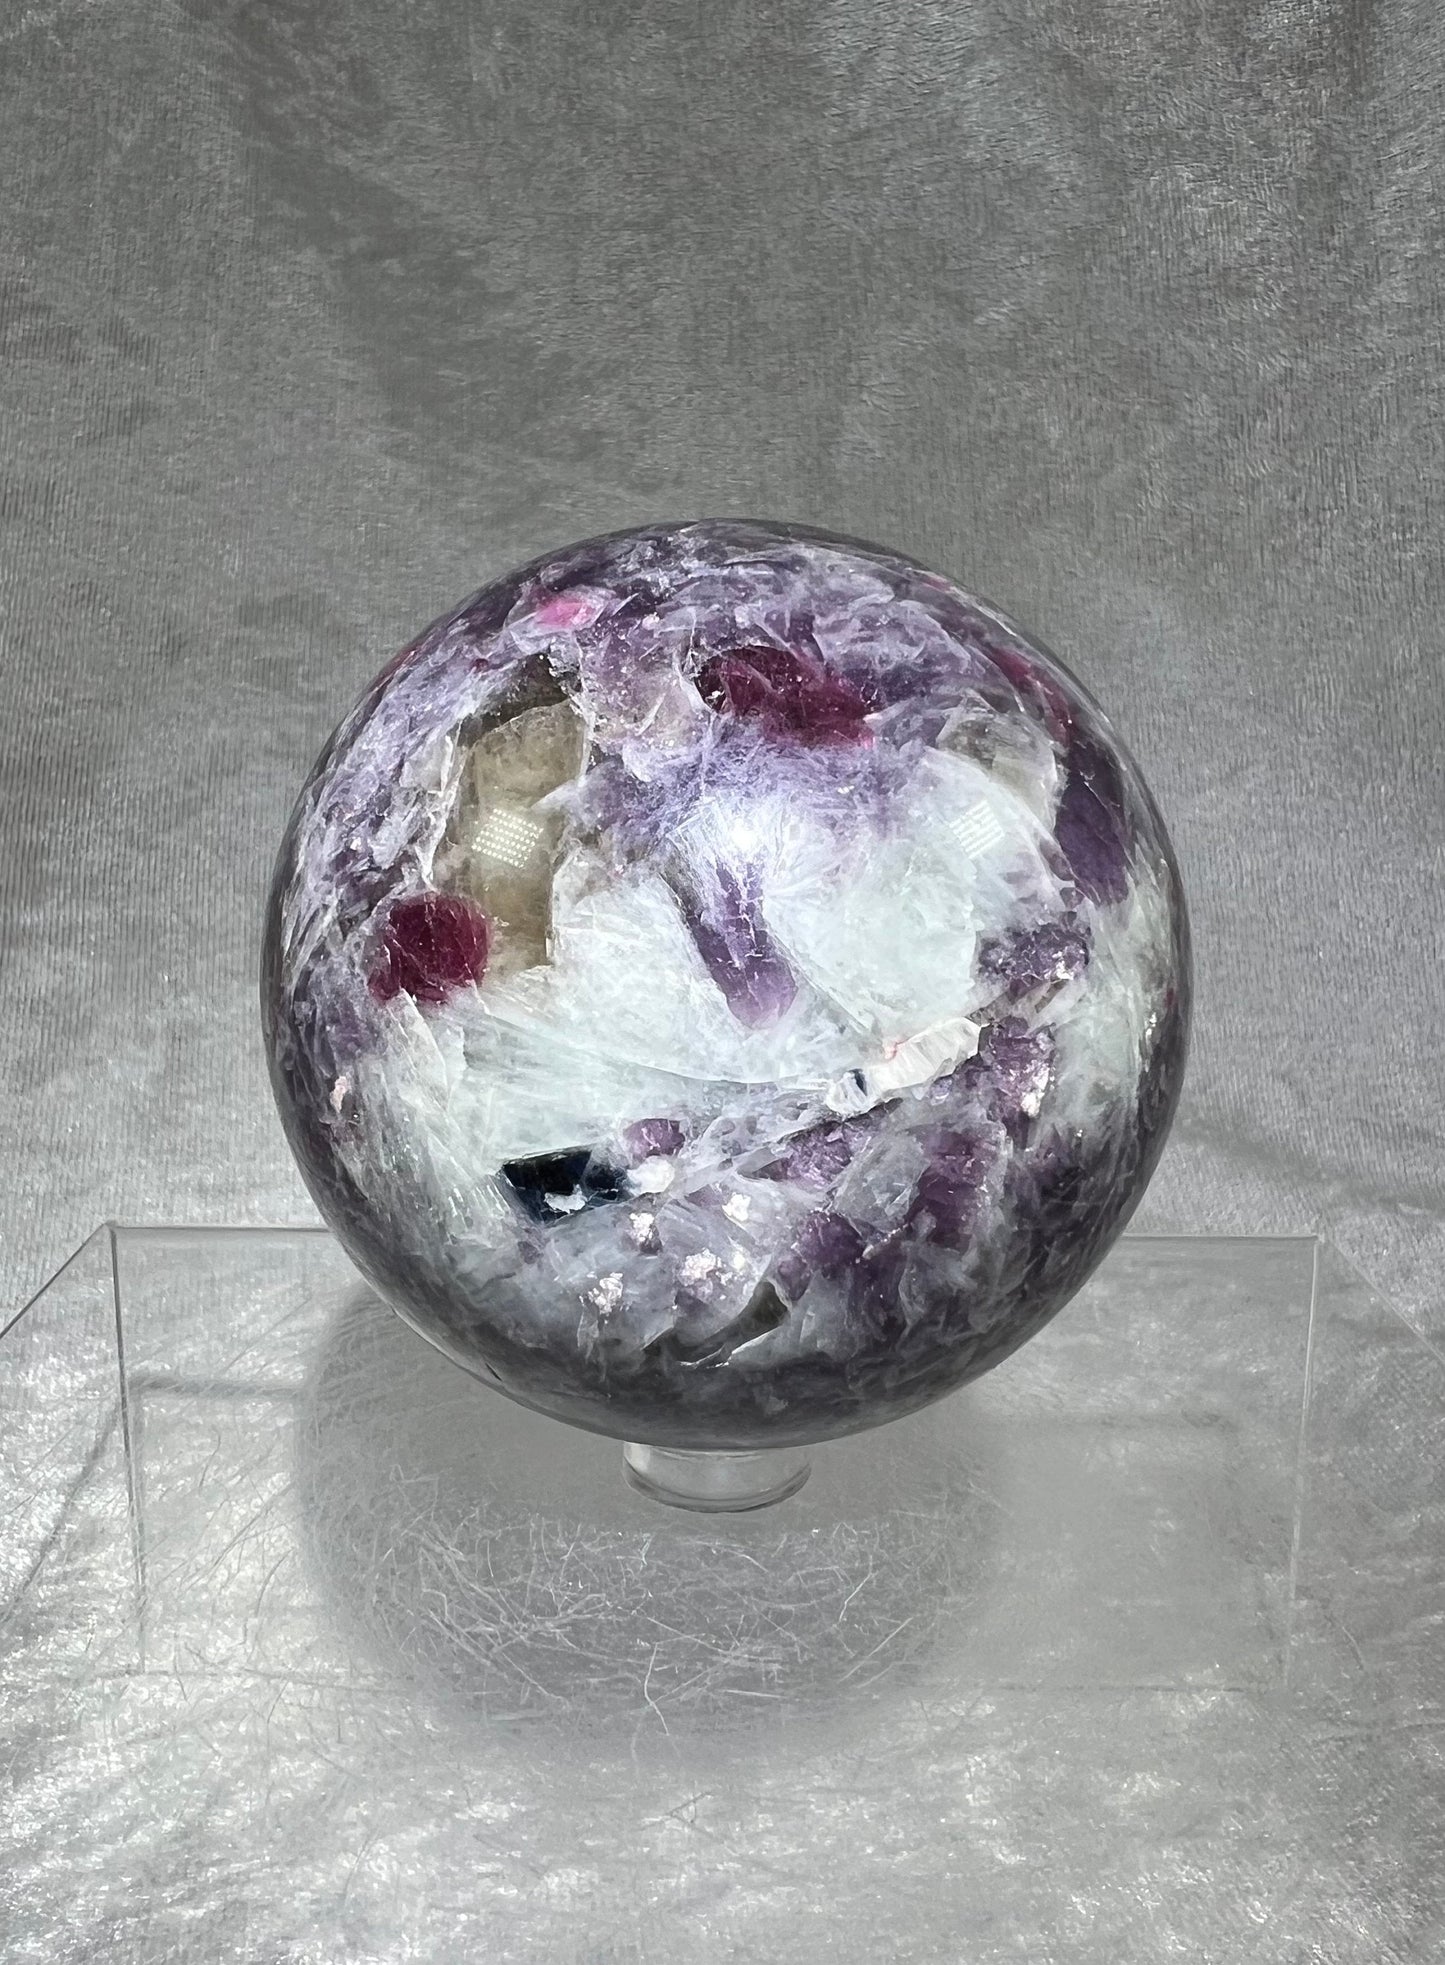 Gorgeous Large Unicorn Crystal Sphere. 75mm. Amazing Color Combinations. High Quality Crystal With Lots Of Flash.